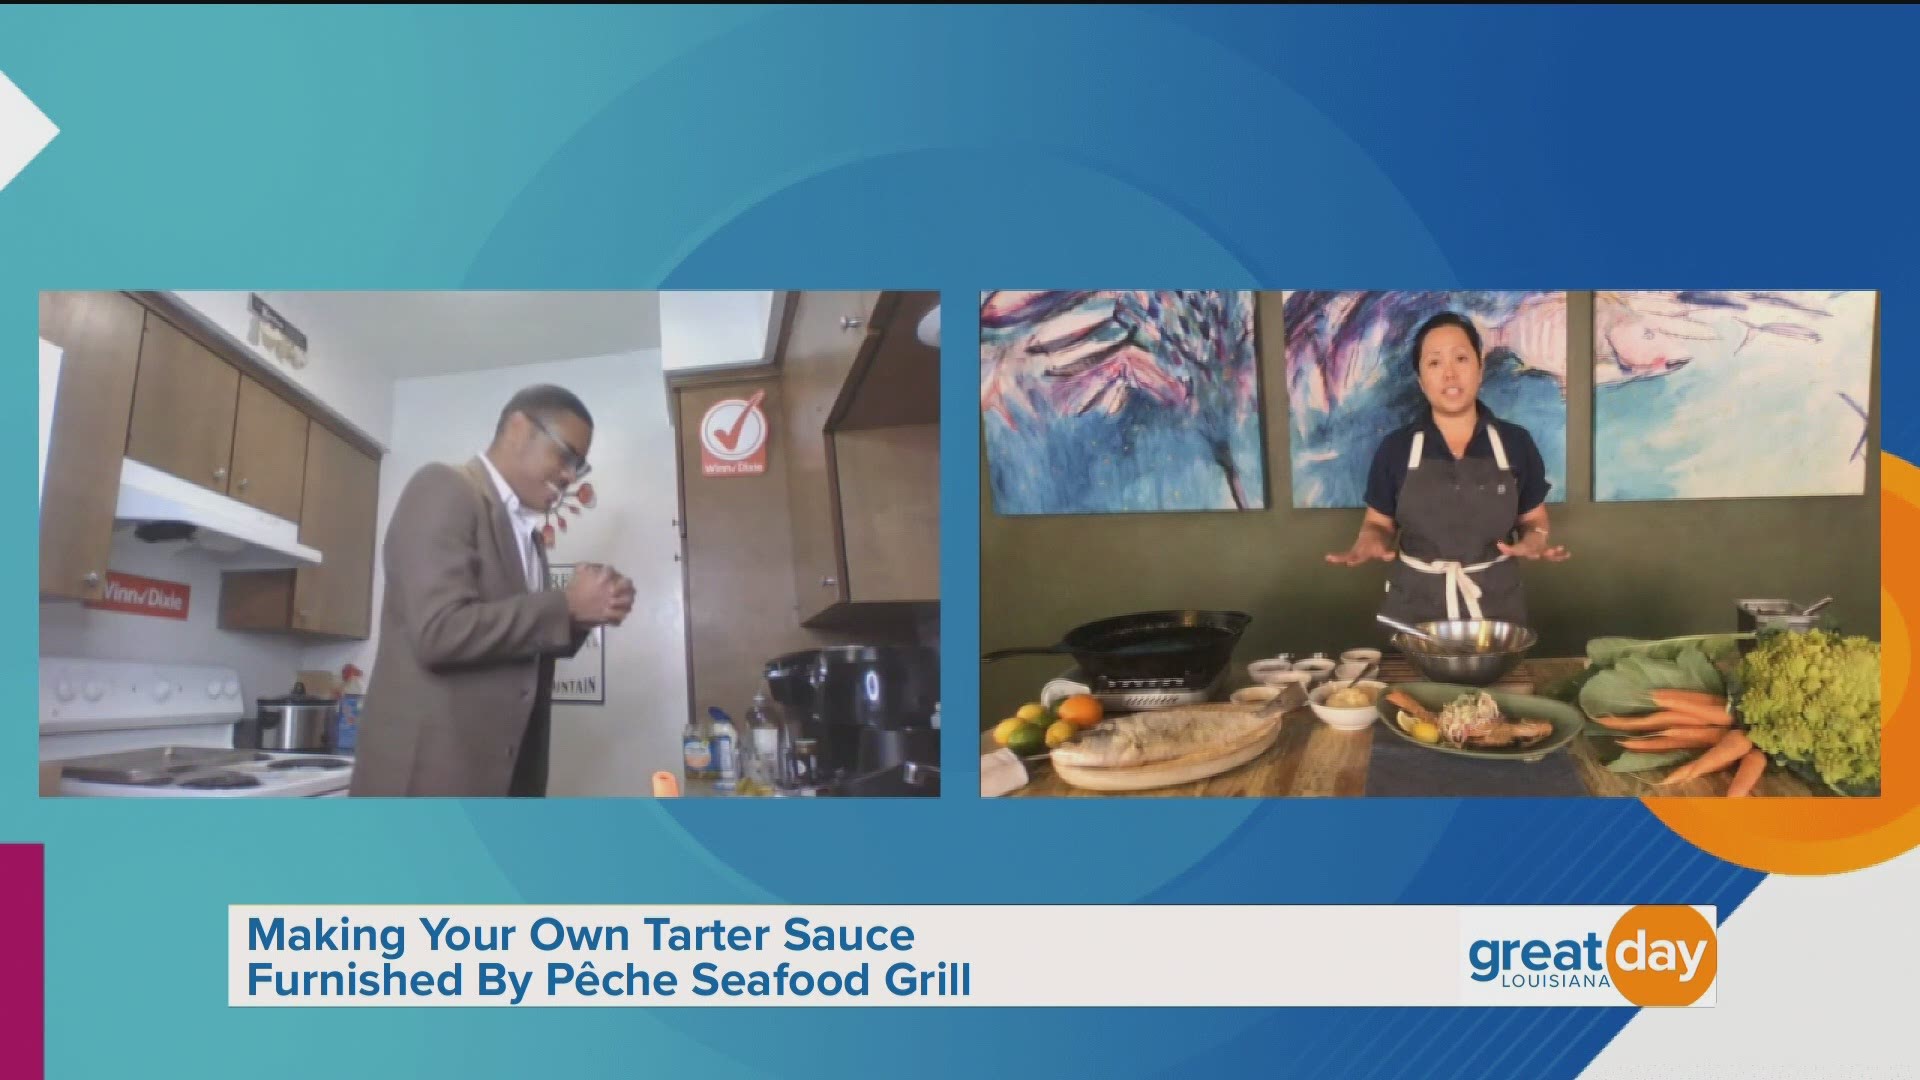 Péche Seafood Grill shared a tartar sauce recipe for the lent season.